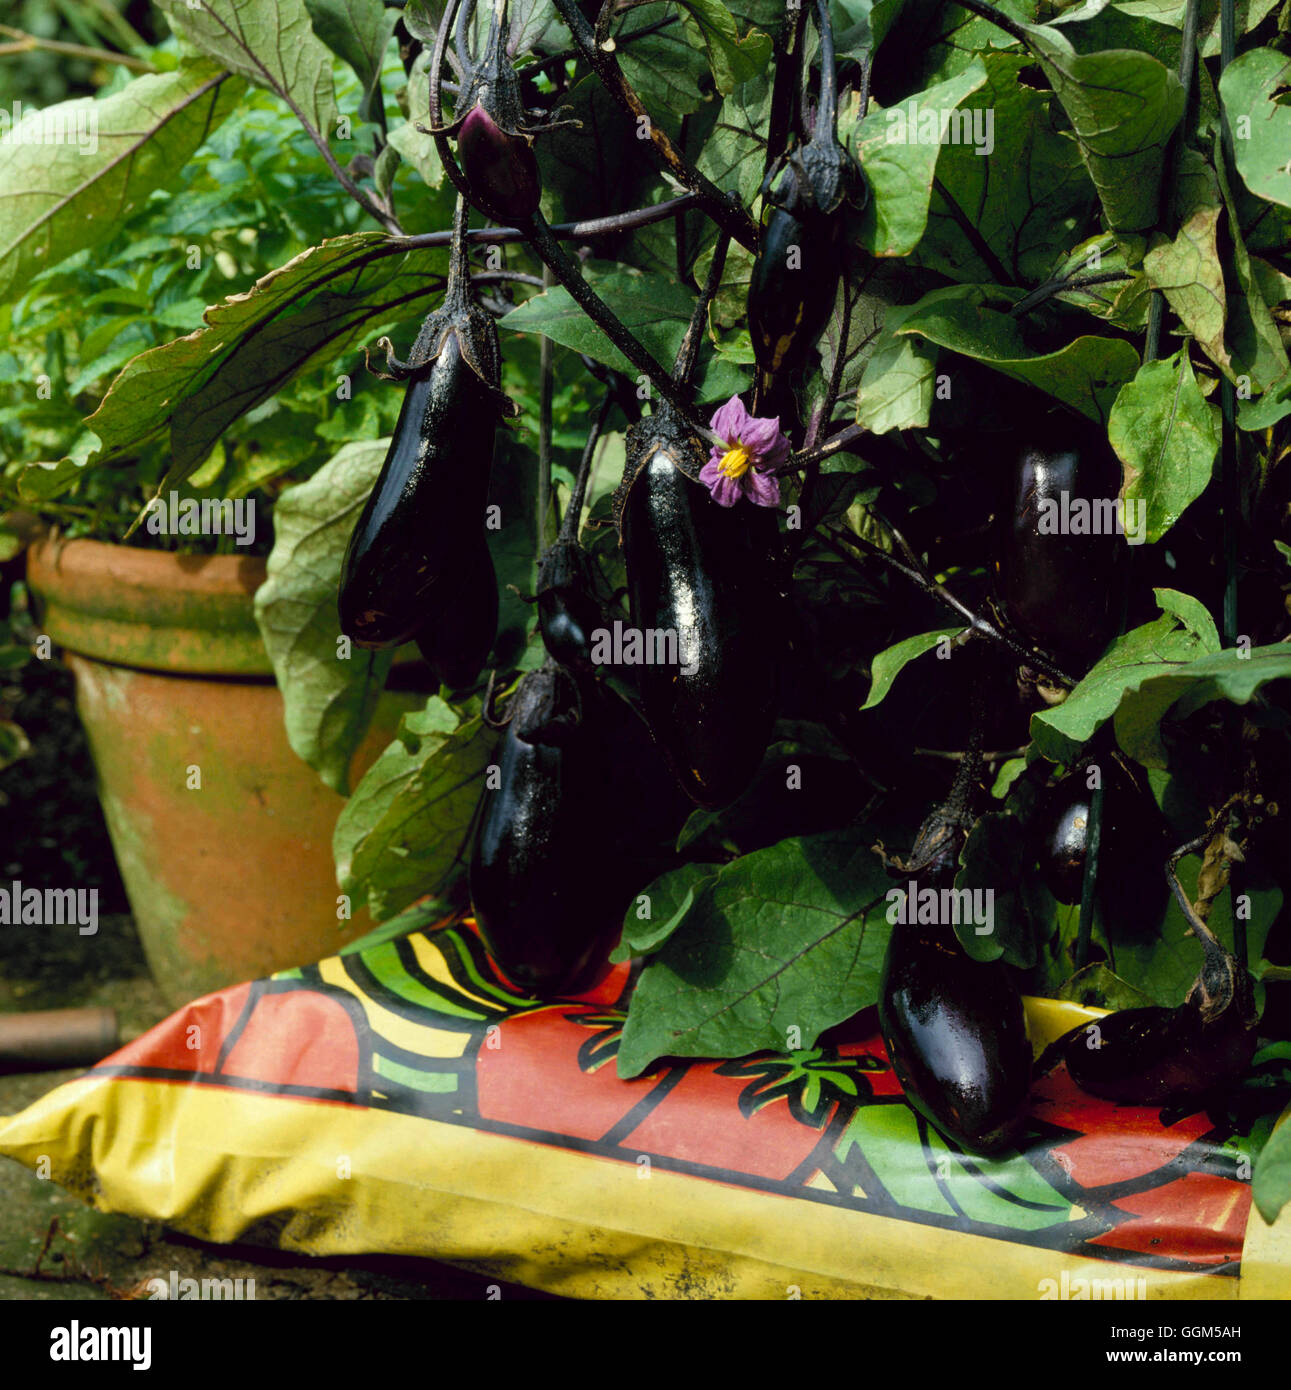 Grow-bag - planted with Aubergines   TAS024671 Stock Photo